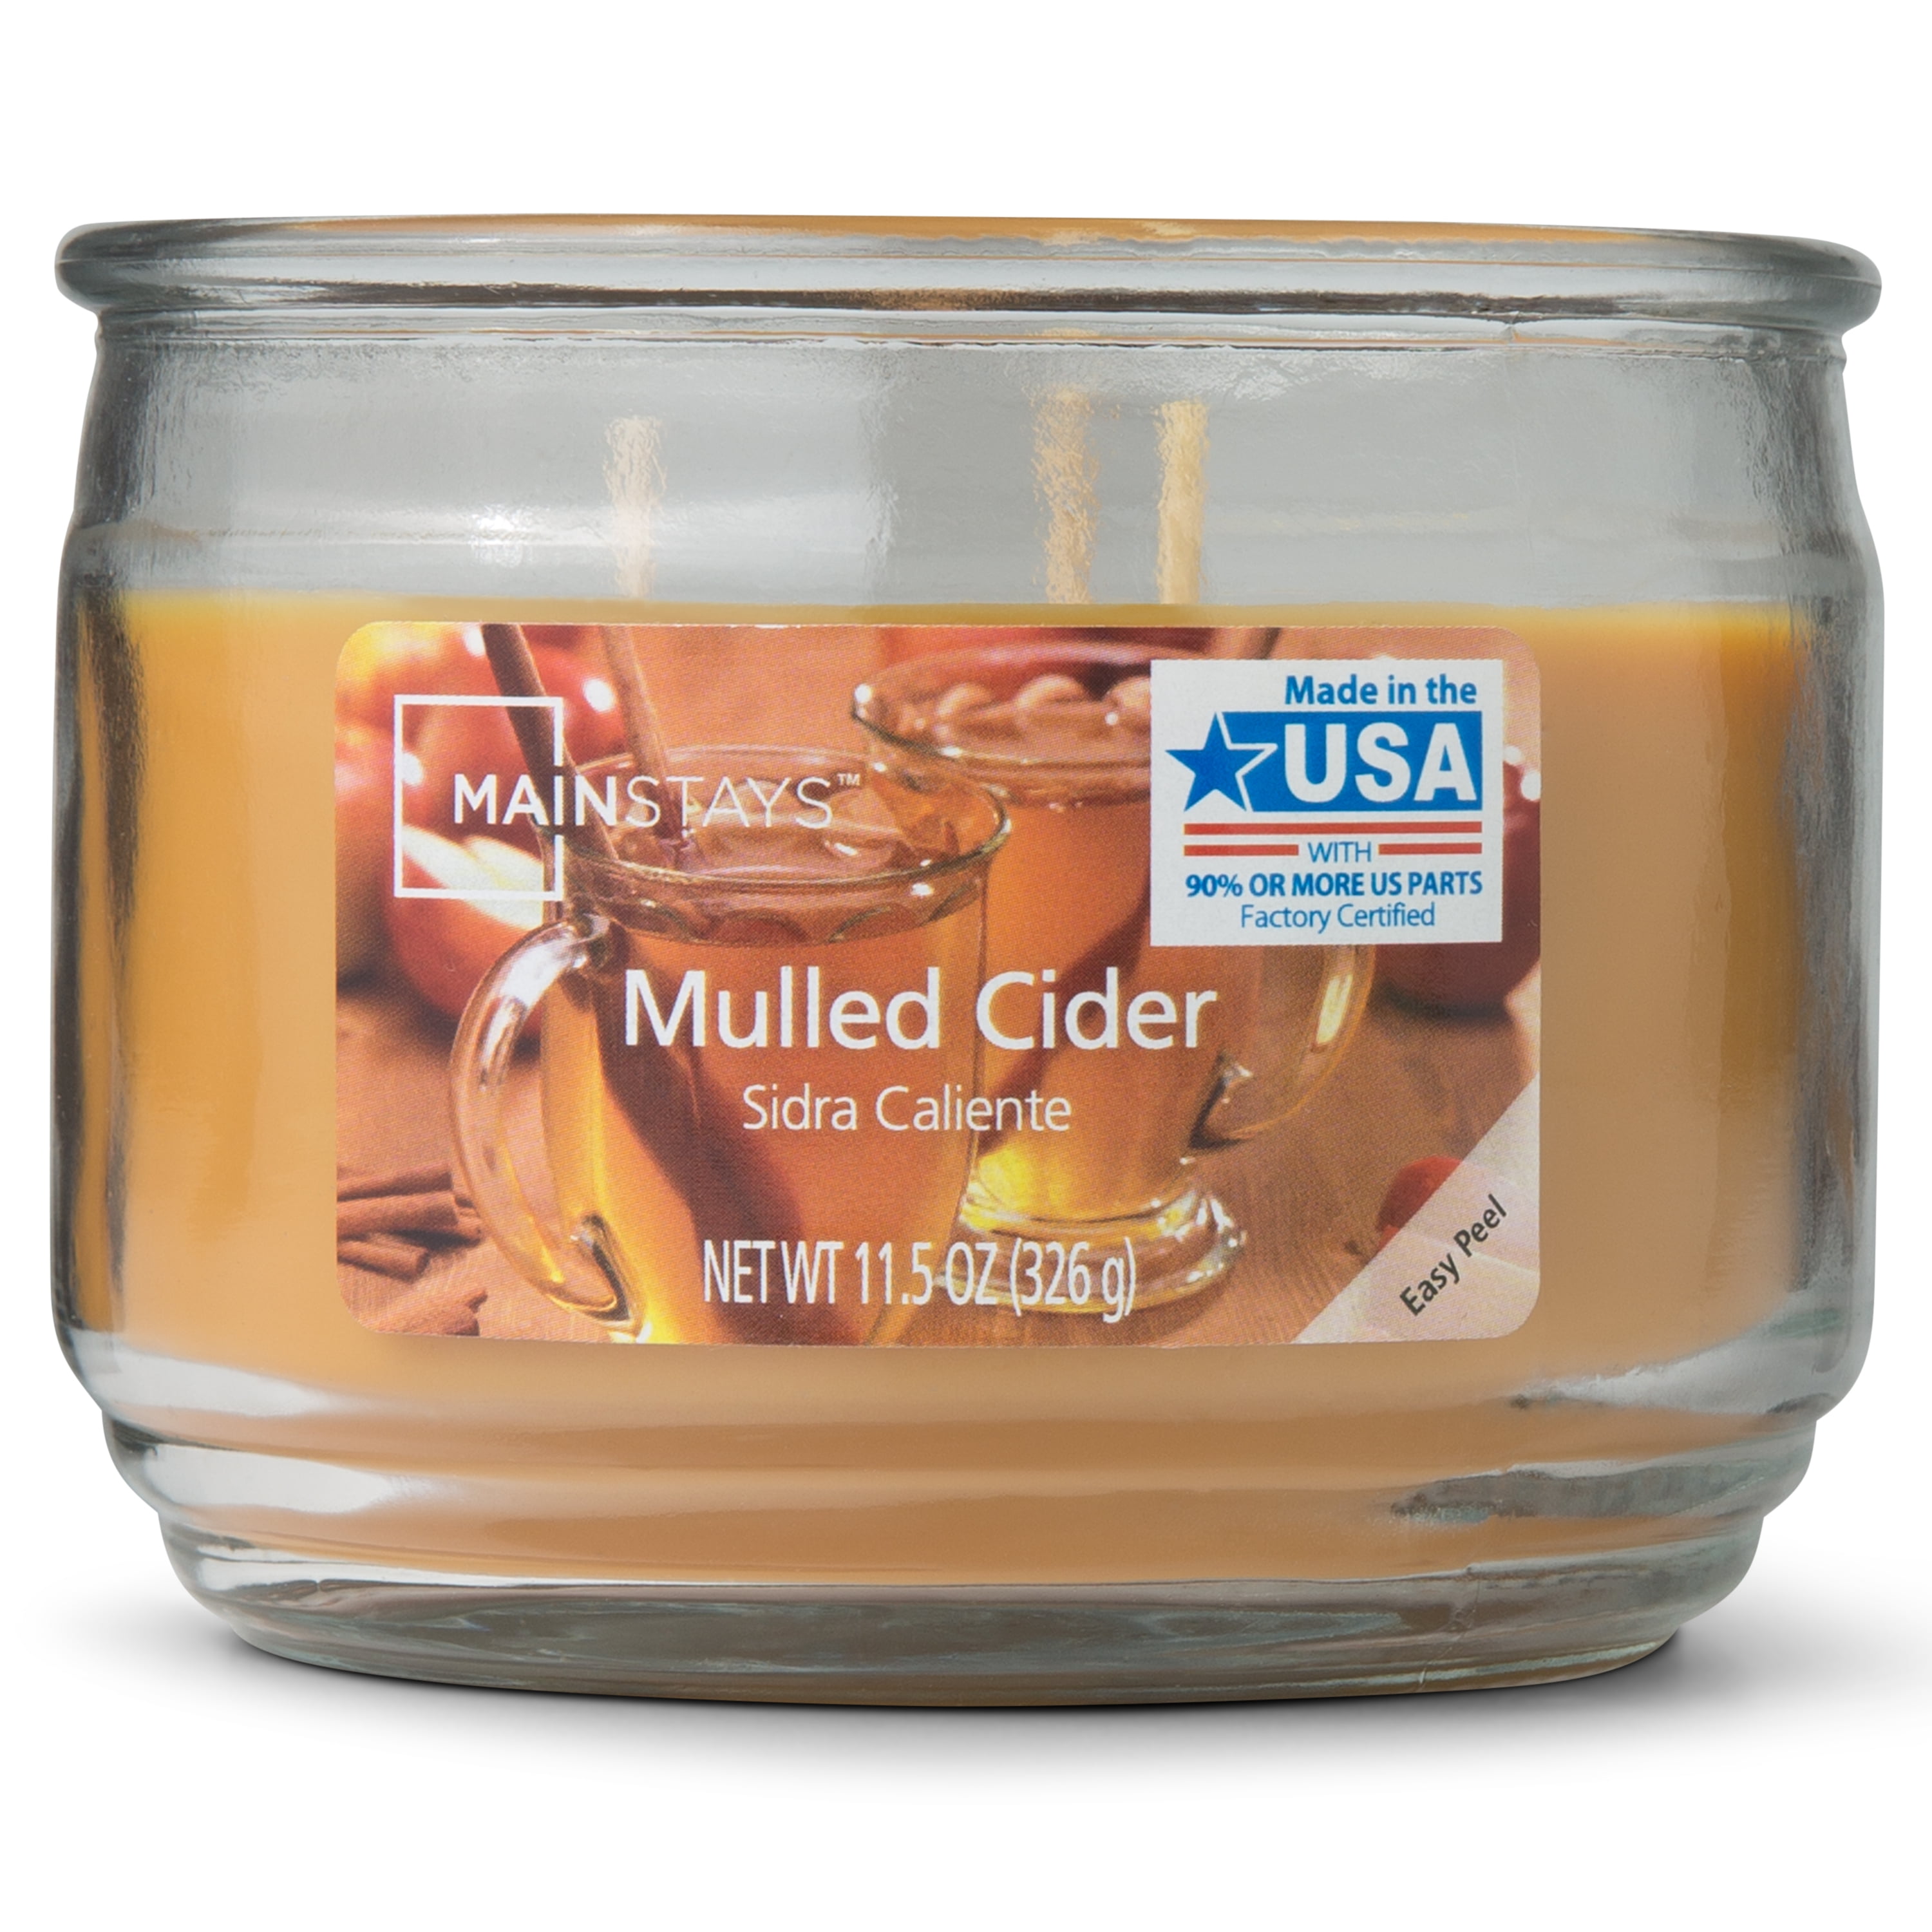 Faux Food Candle Brownie In A Mug Dessert Candle Scented Chocolate Food Candle